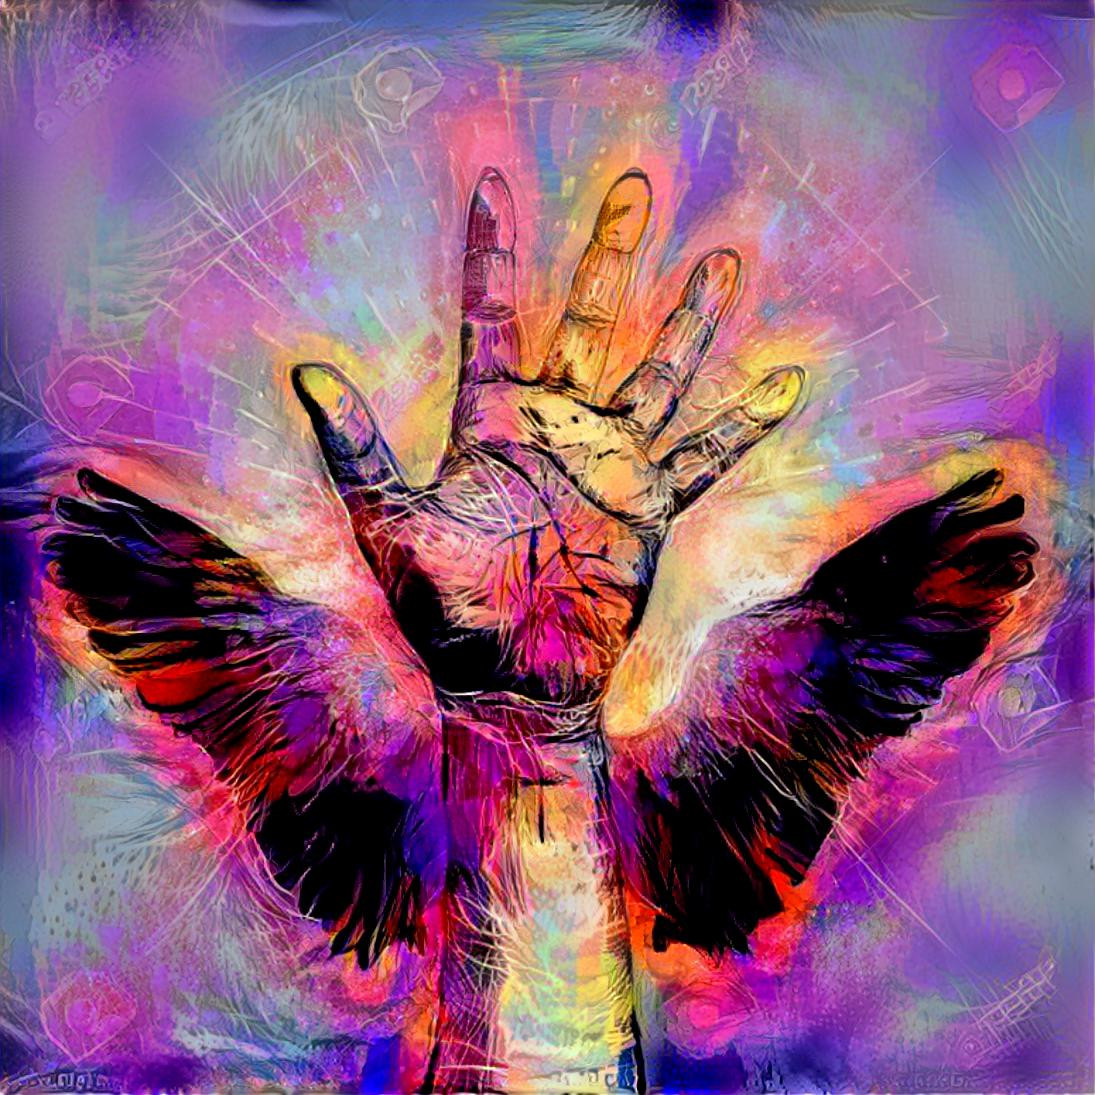 Reaching up (Image: charity-concept-donation-love-and-guardian-angel-hand-with-wings-volunteer-poster-human-helping-heal)